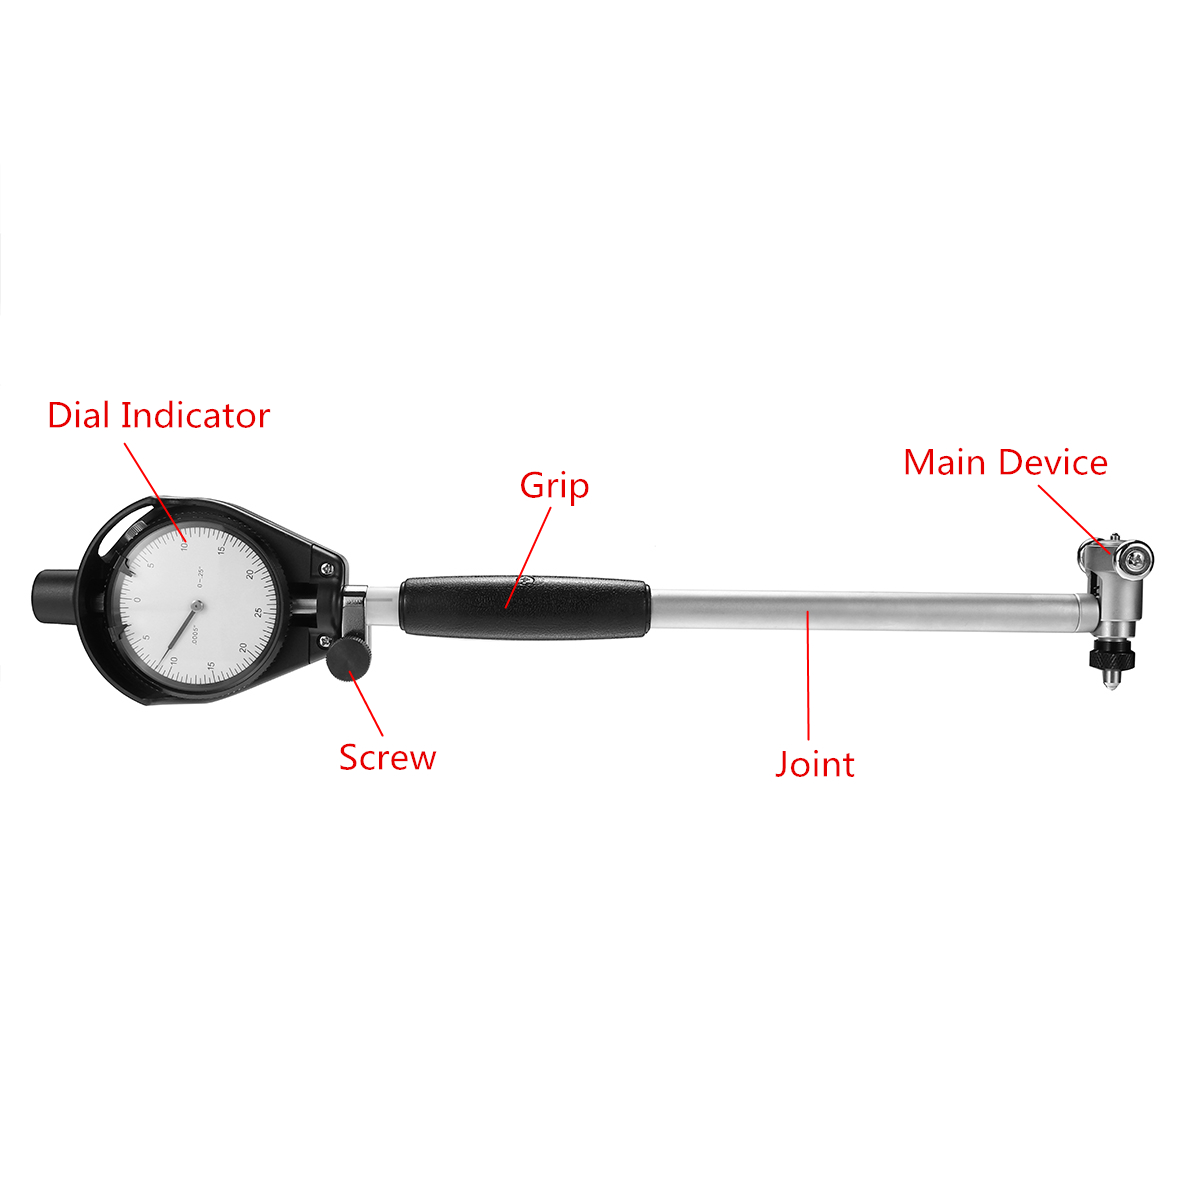 Engine-Cylinder-2-6-Inch-Dial-Bore-Gauge-Measuring-Dial-Indicator-Resolution-00005-Inch-1349647-4